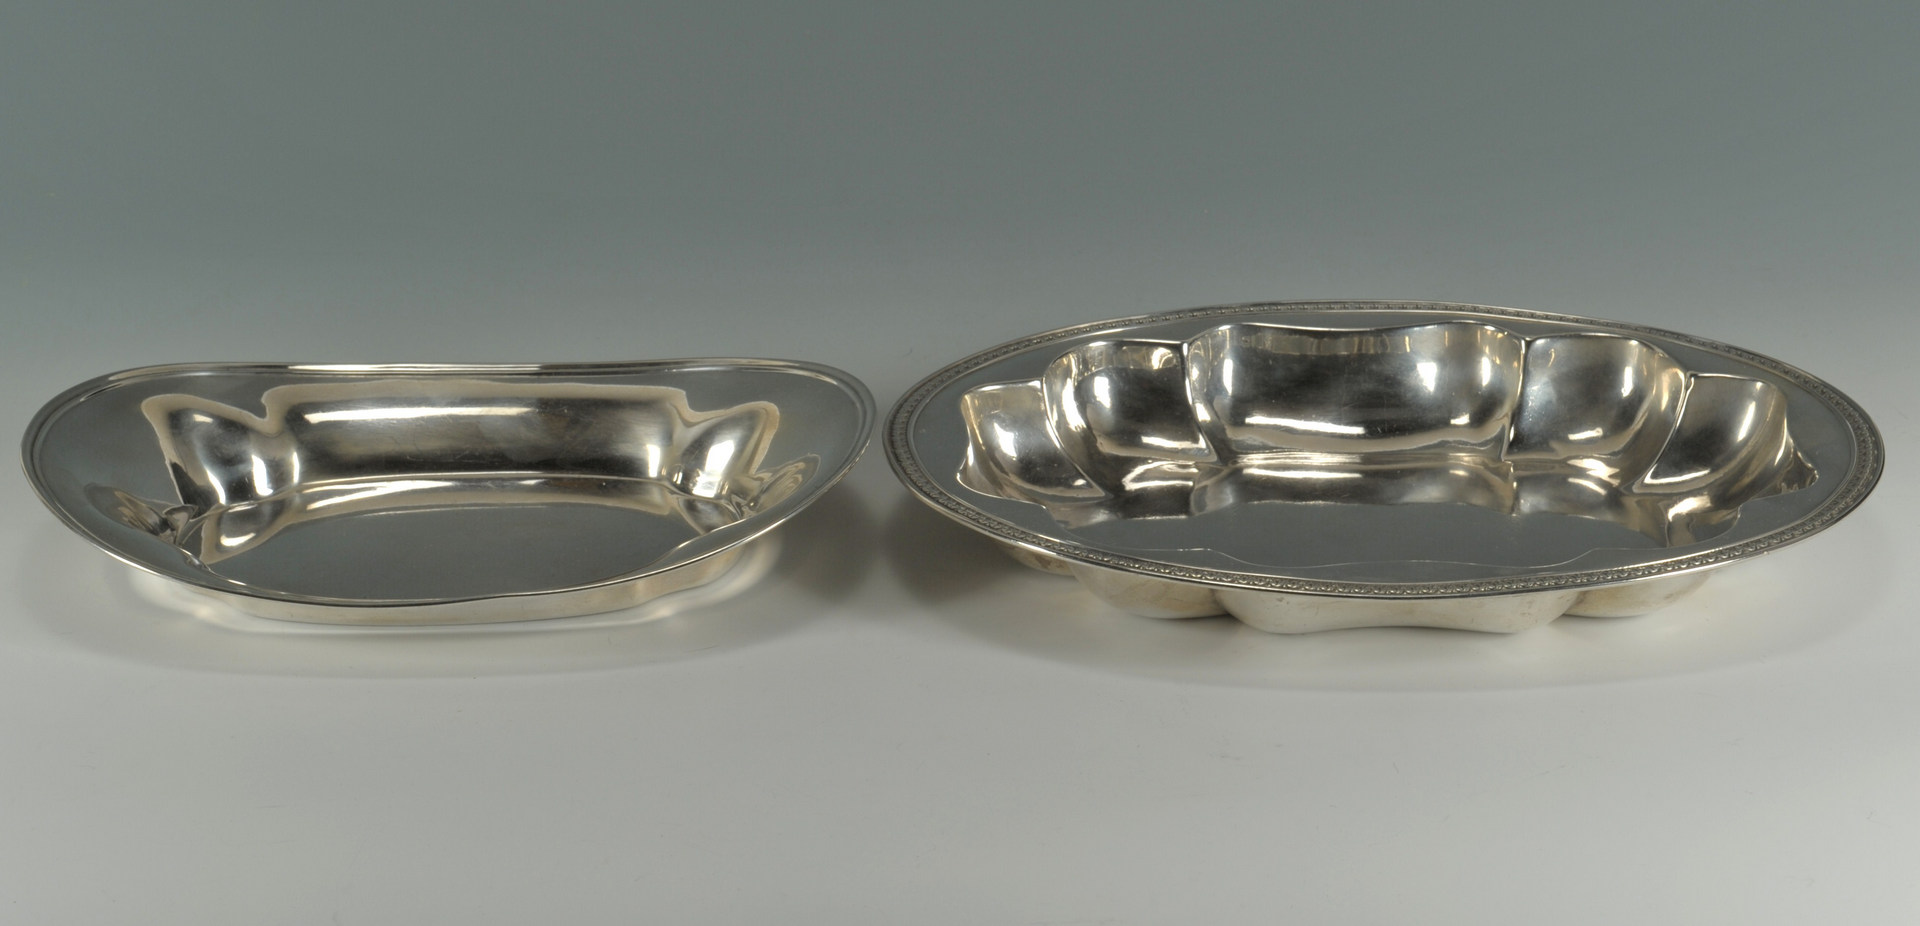 Lot 238: 4 pcs Sterling hollowware: bowls and bread trays